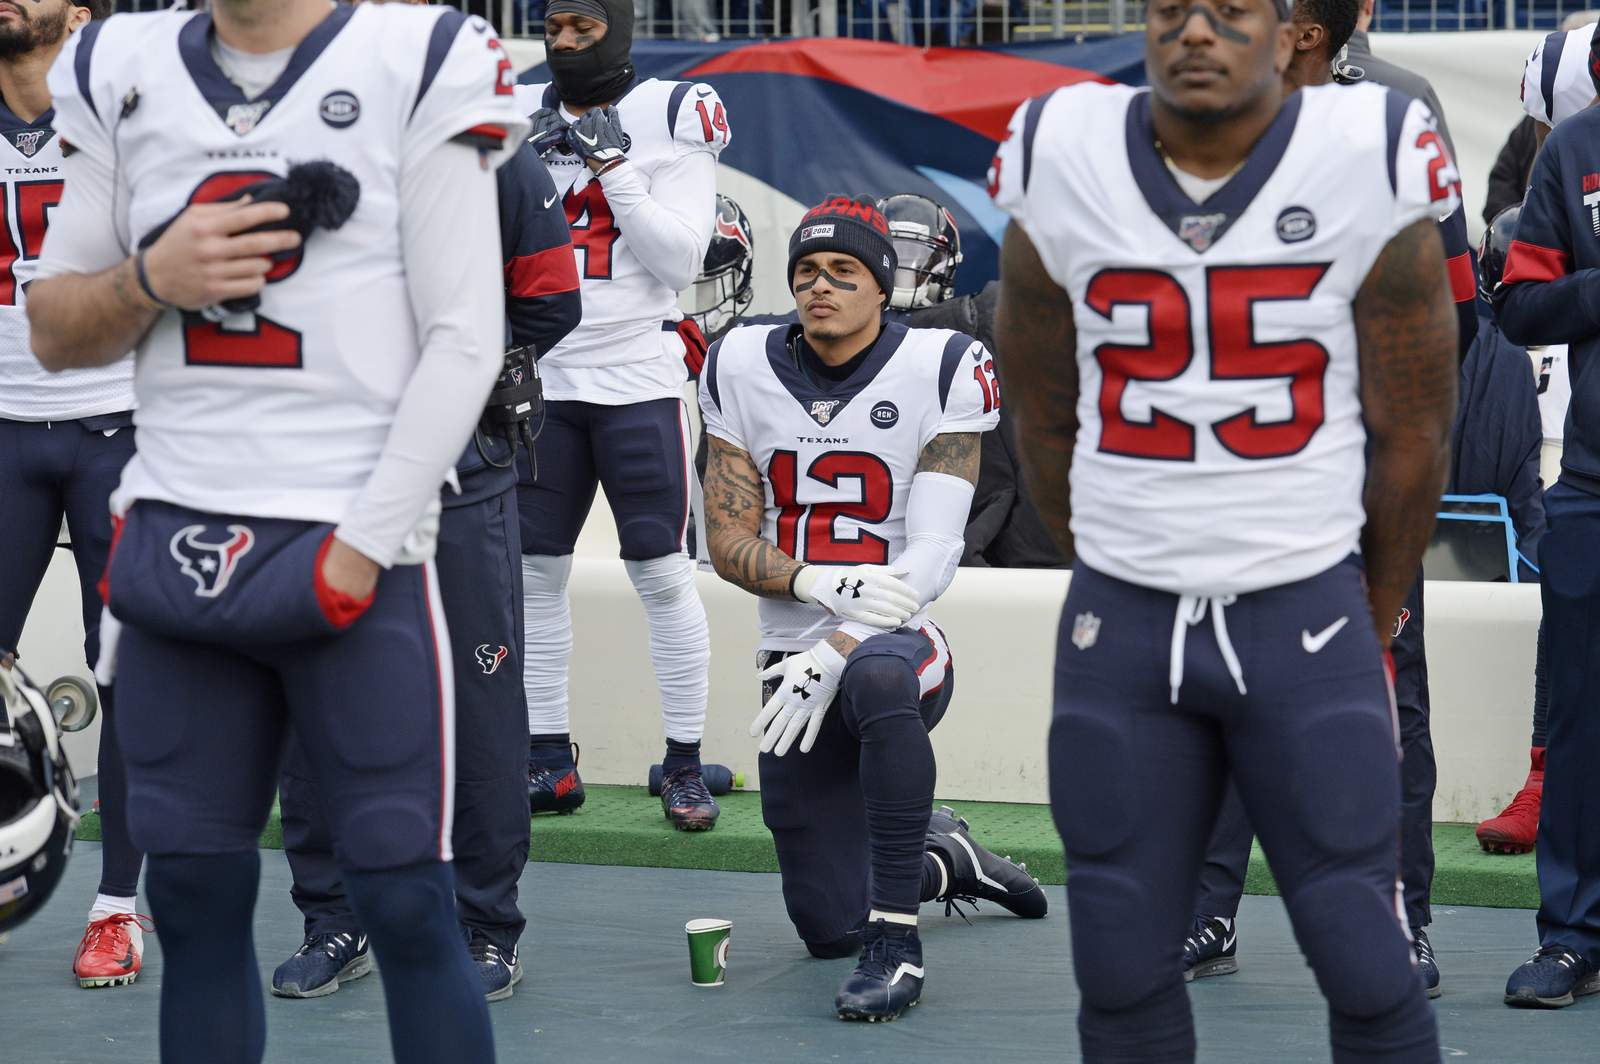 True Hero! Houston Texans players rally behind Kenny Stills after he was arrested during a Breonna Taylor protest